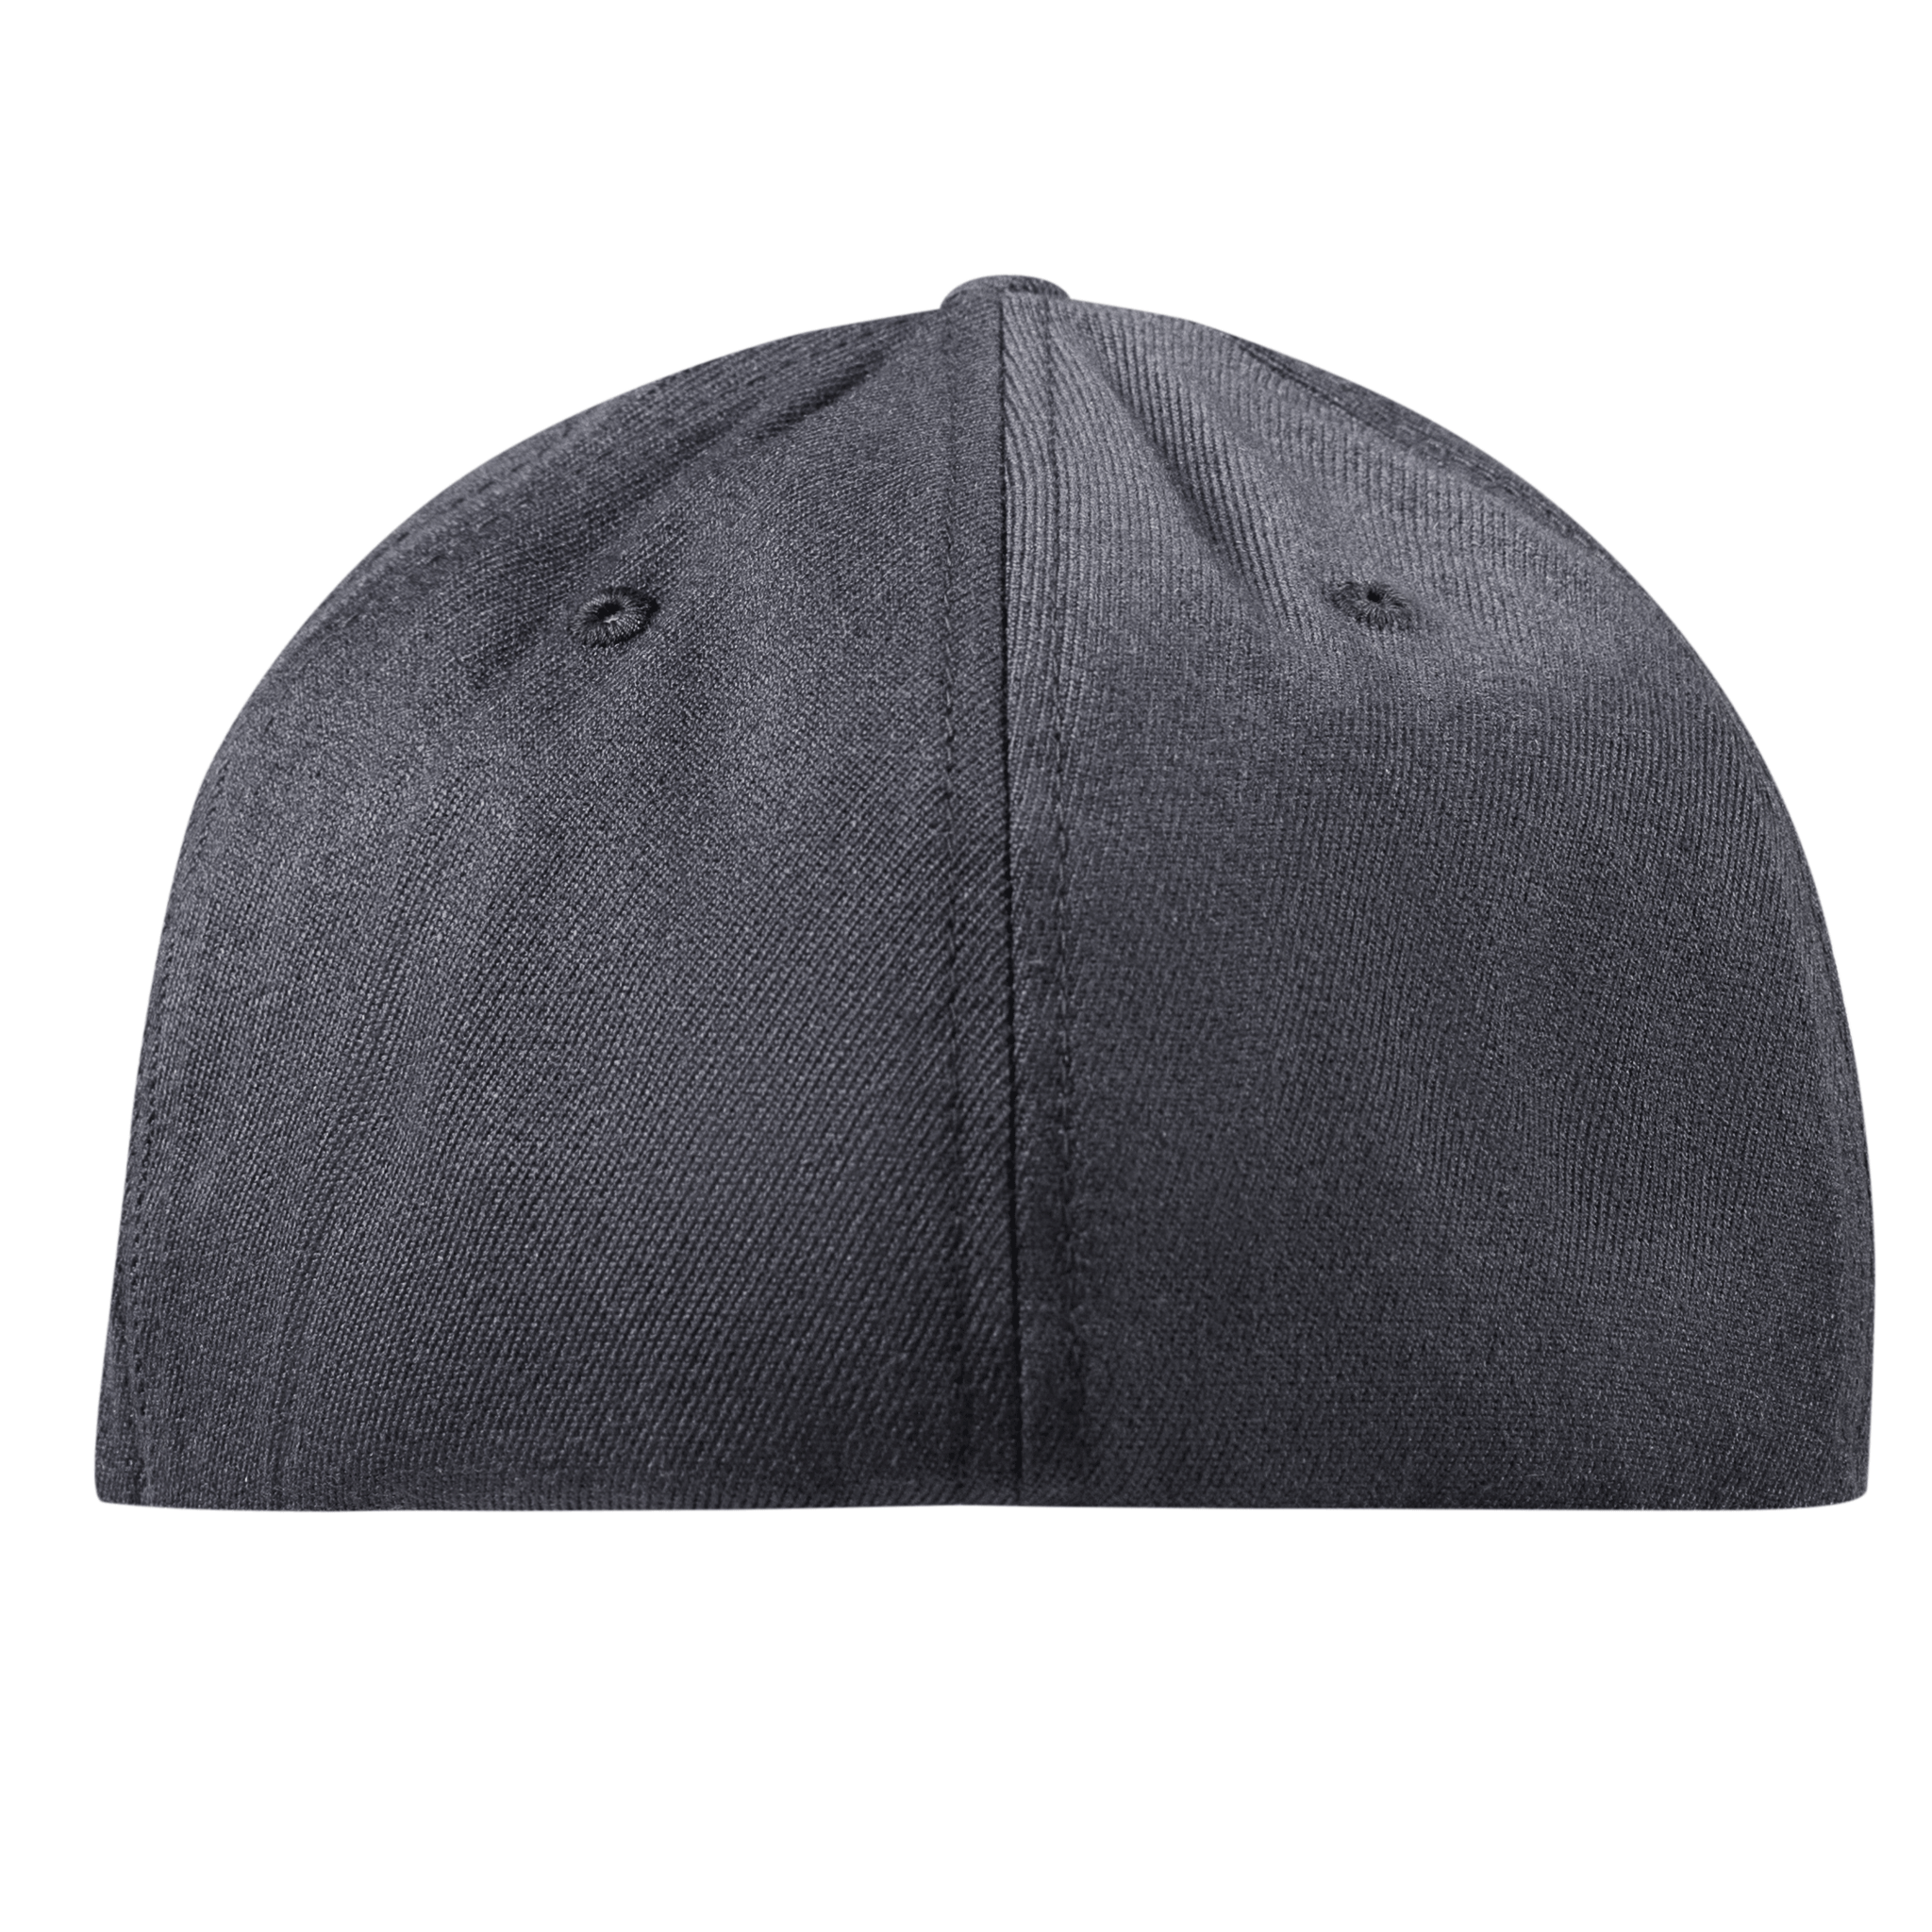 1776 PVC Flexfit Fitted Back Charcoal